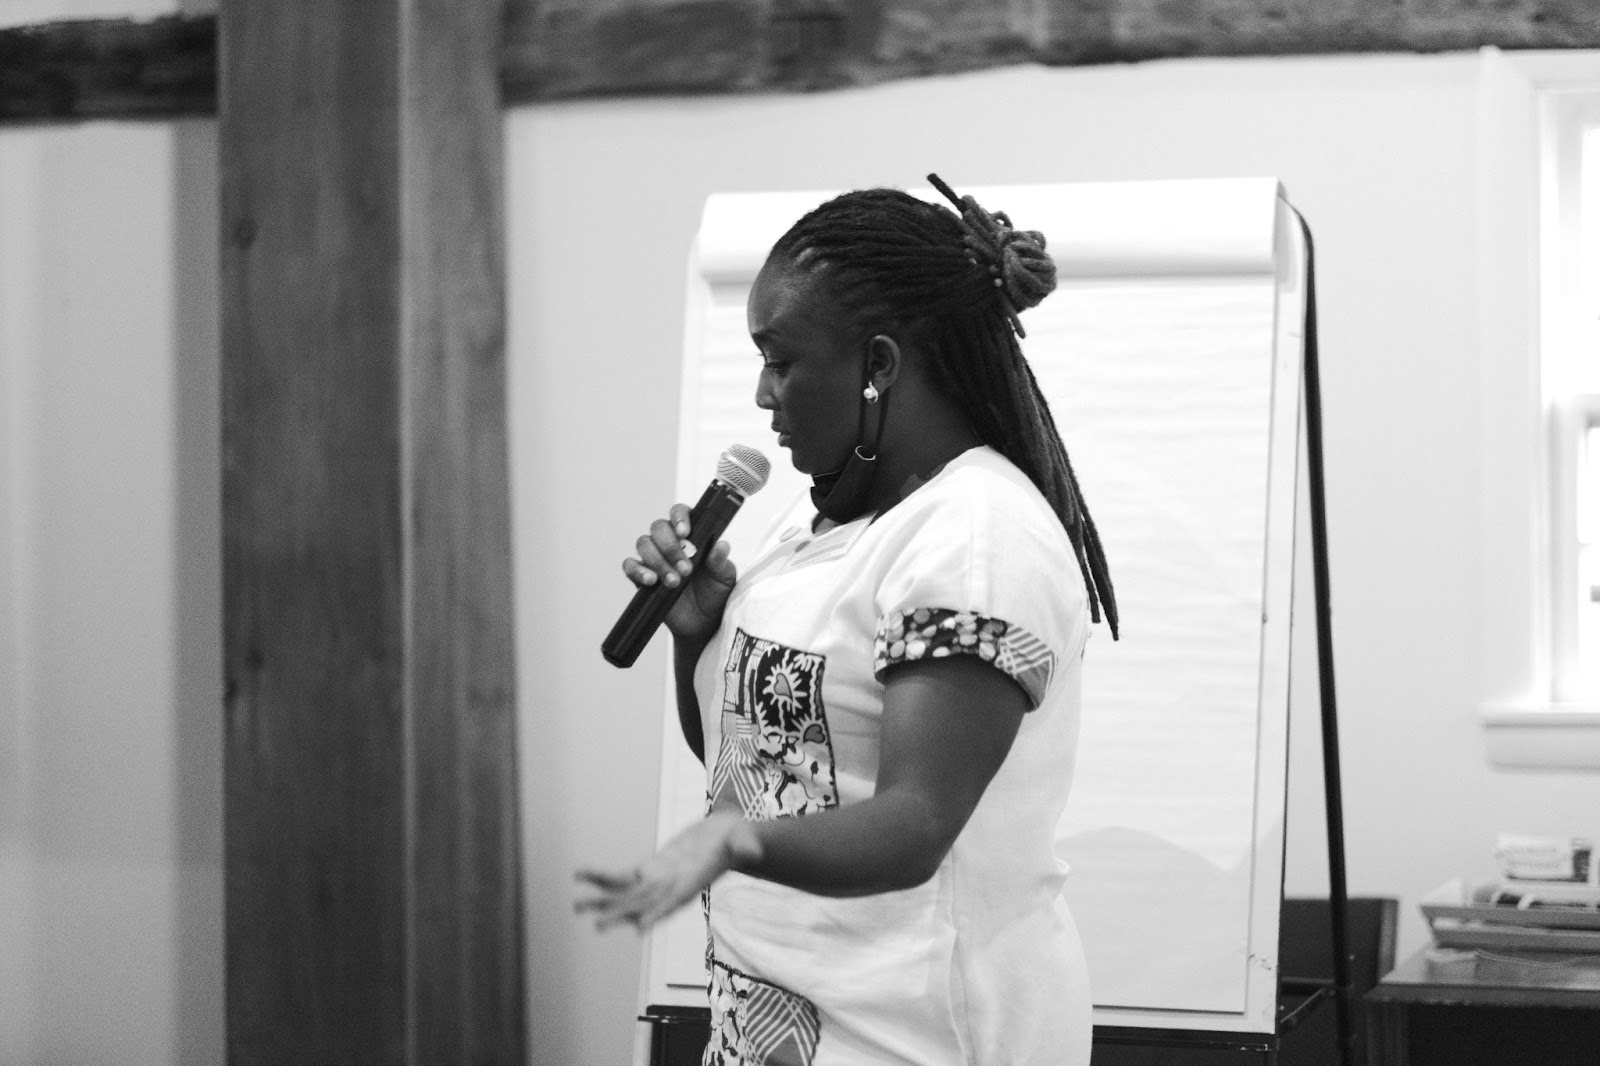 A Ugandan organizer, Peruth, Nabirye in a white linen tunic with colorful accents speaks into a mic in front of a flipchart